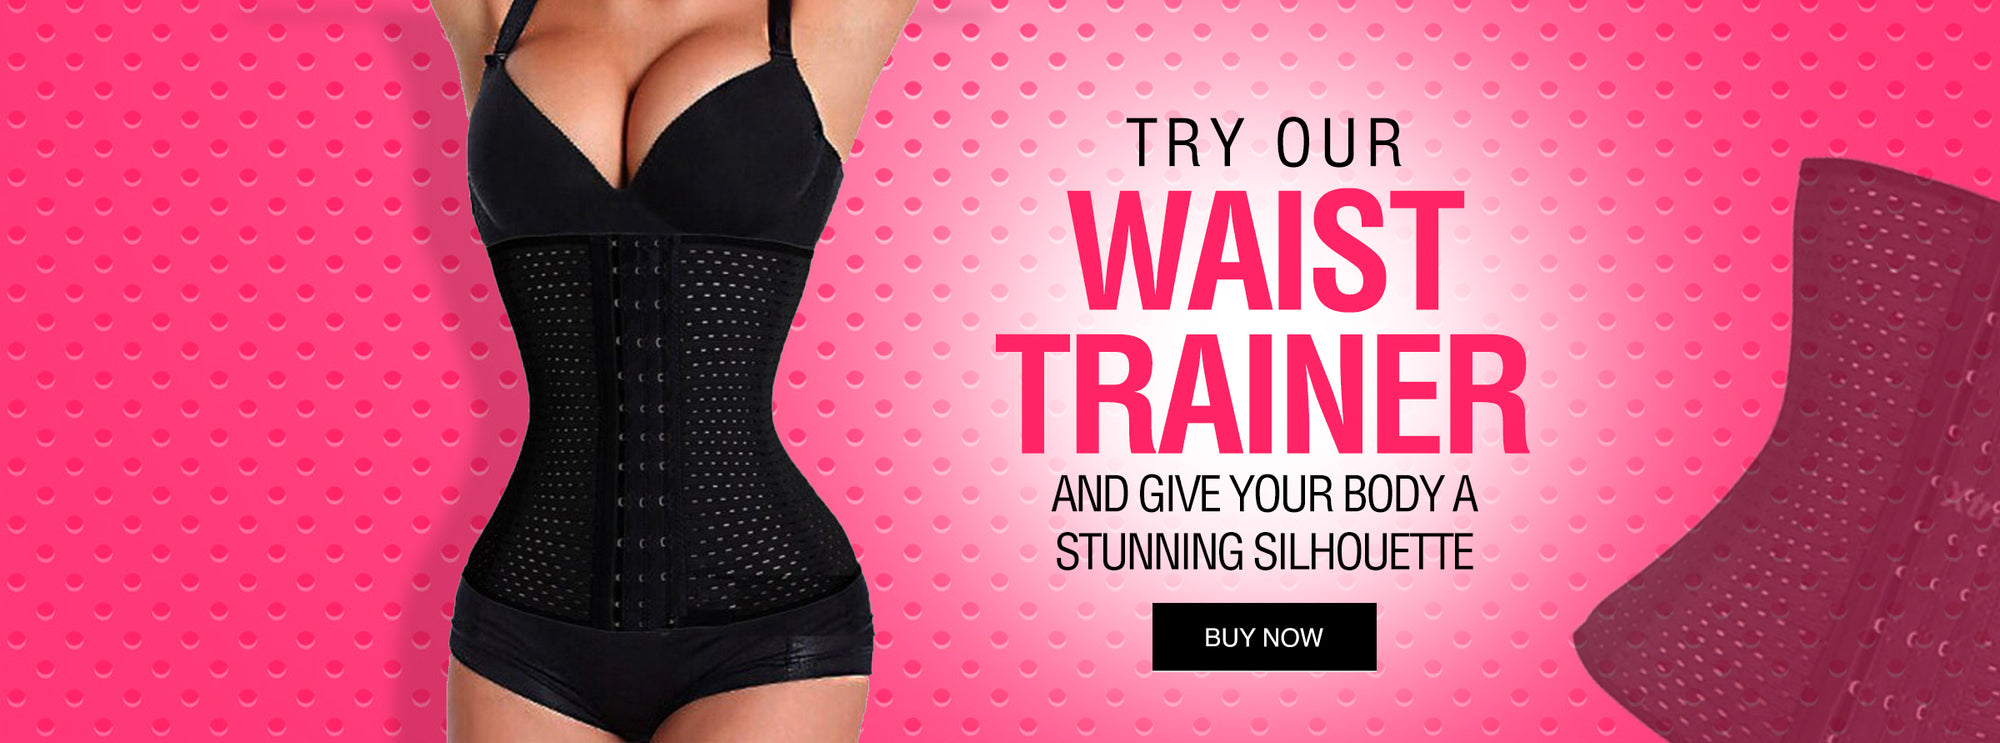 Try our Waist Trainer and Give your Body a Stunning Silhouette